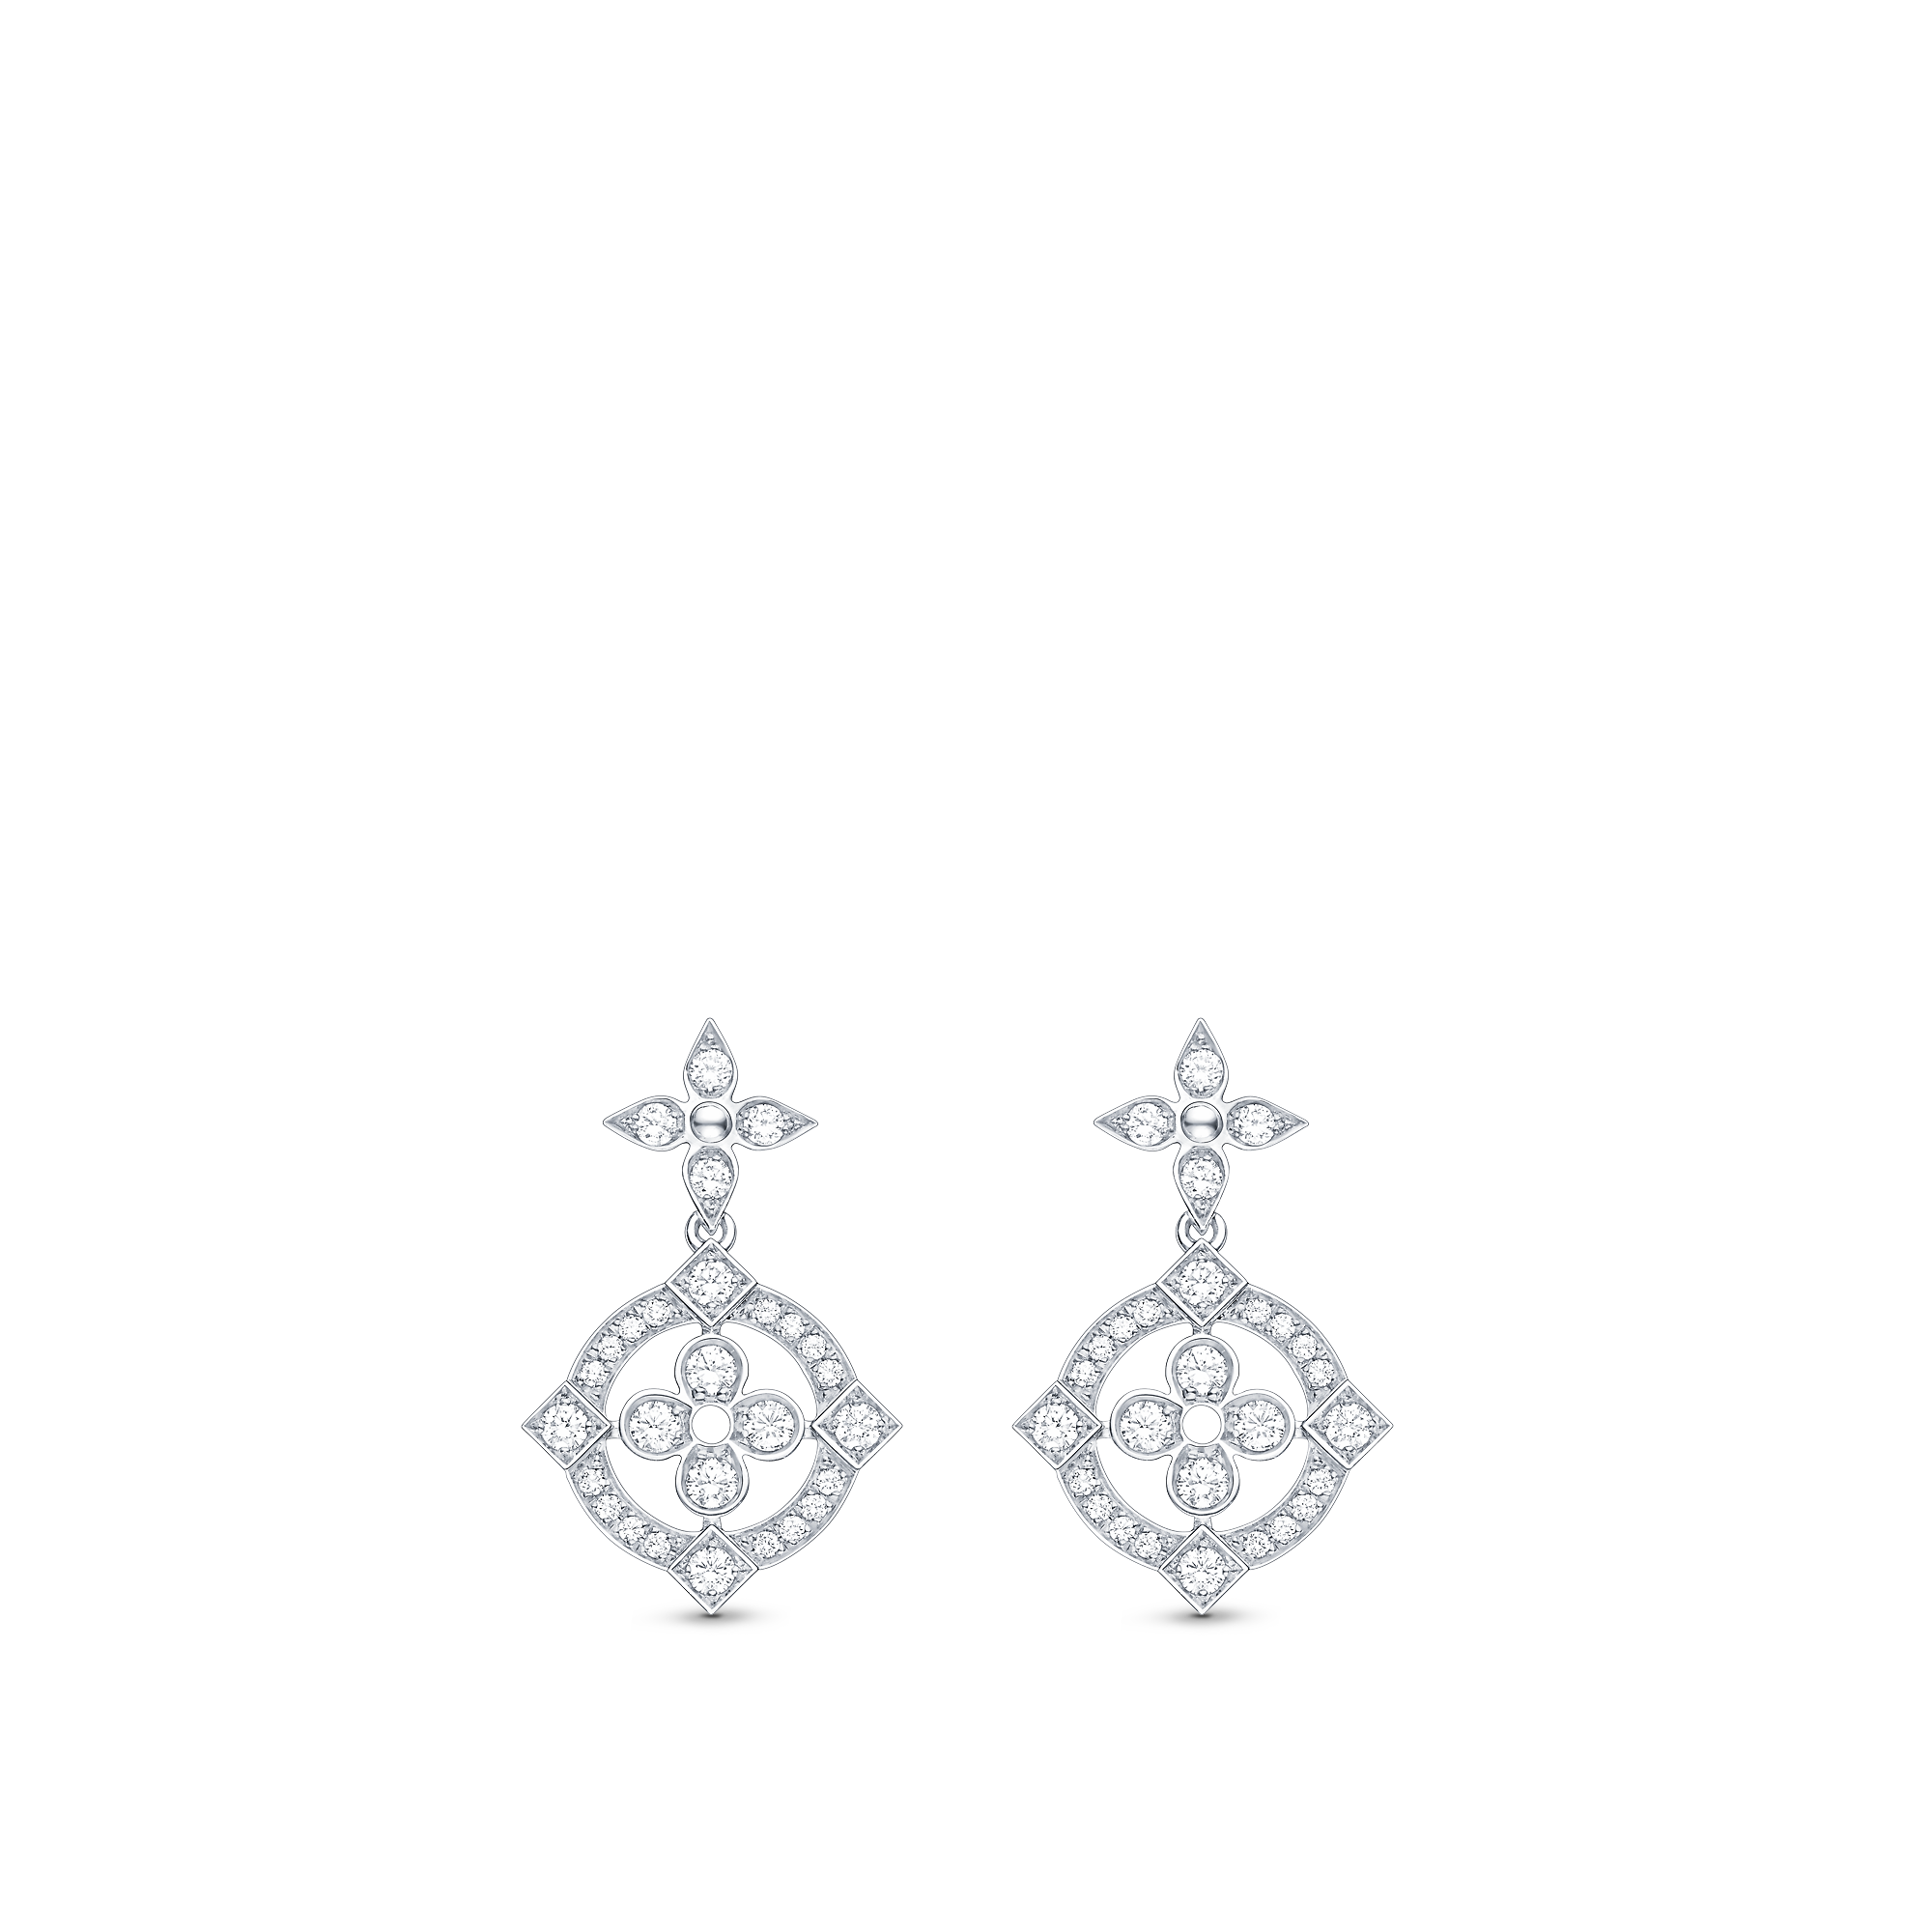 Louis Vuitton Dentelle Earrings, White Gold And Diamonds – Jewelry – Categories Q96760